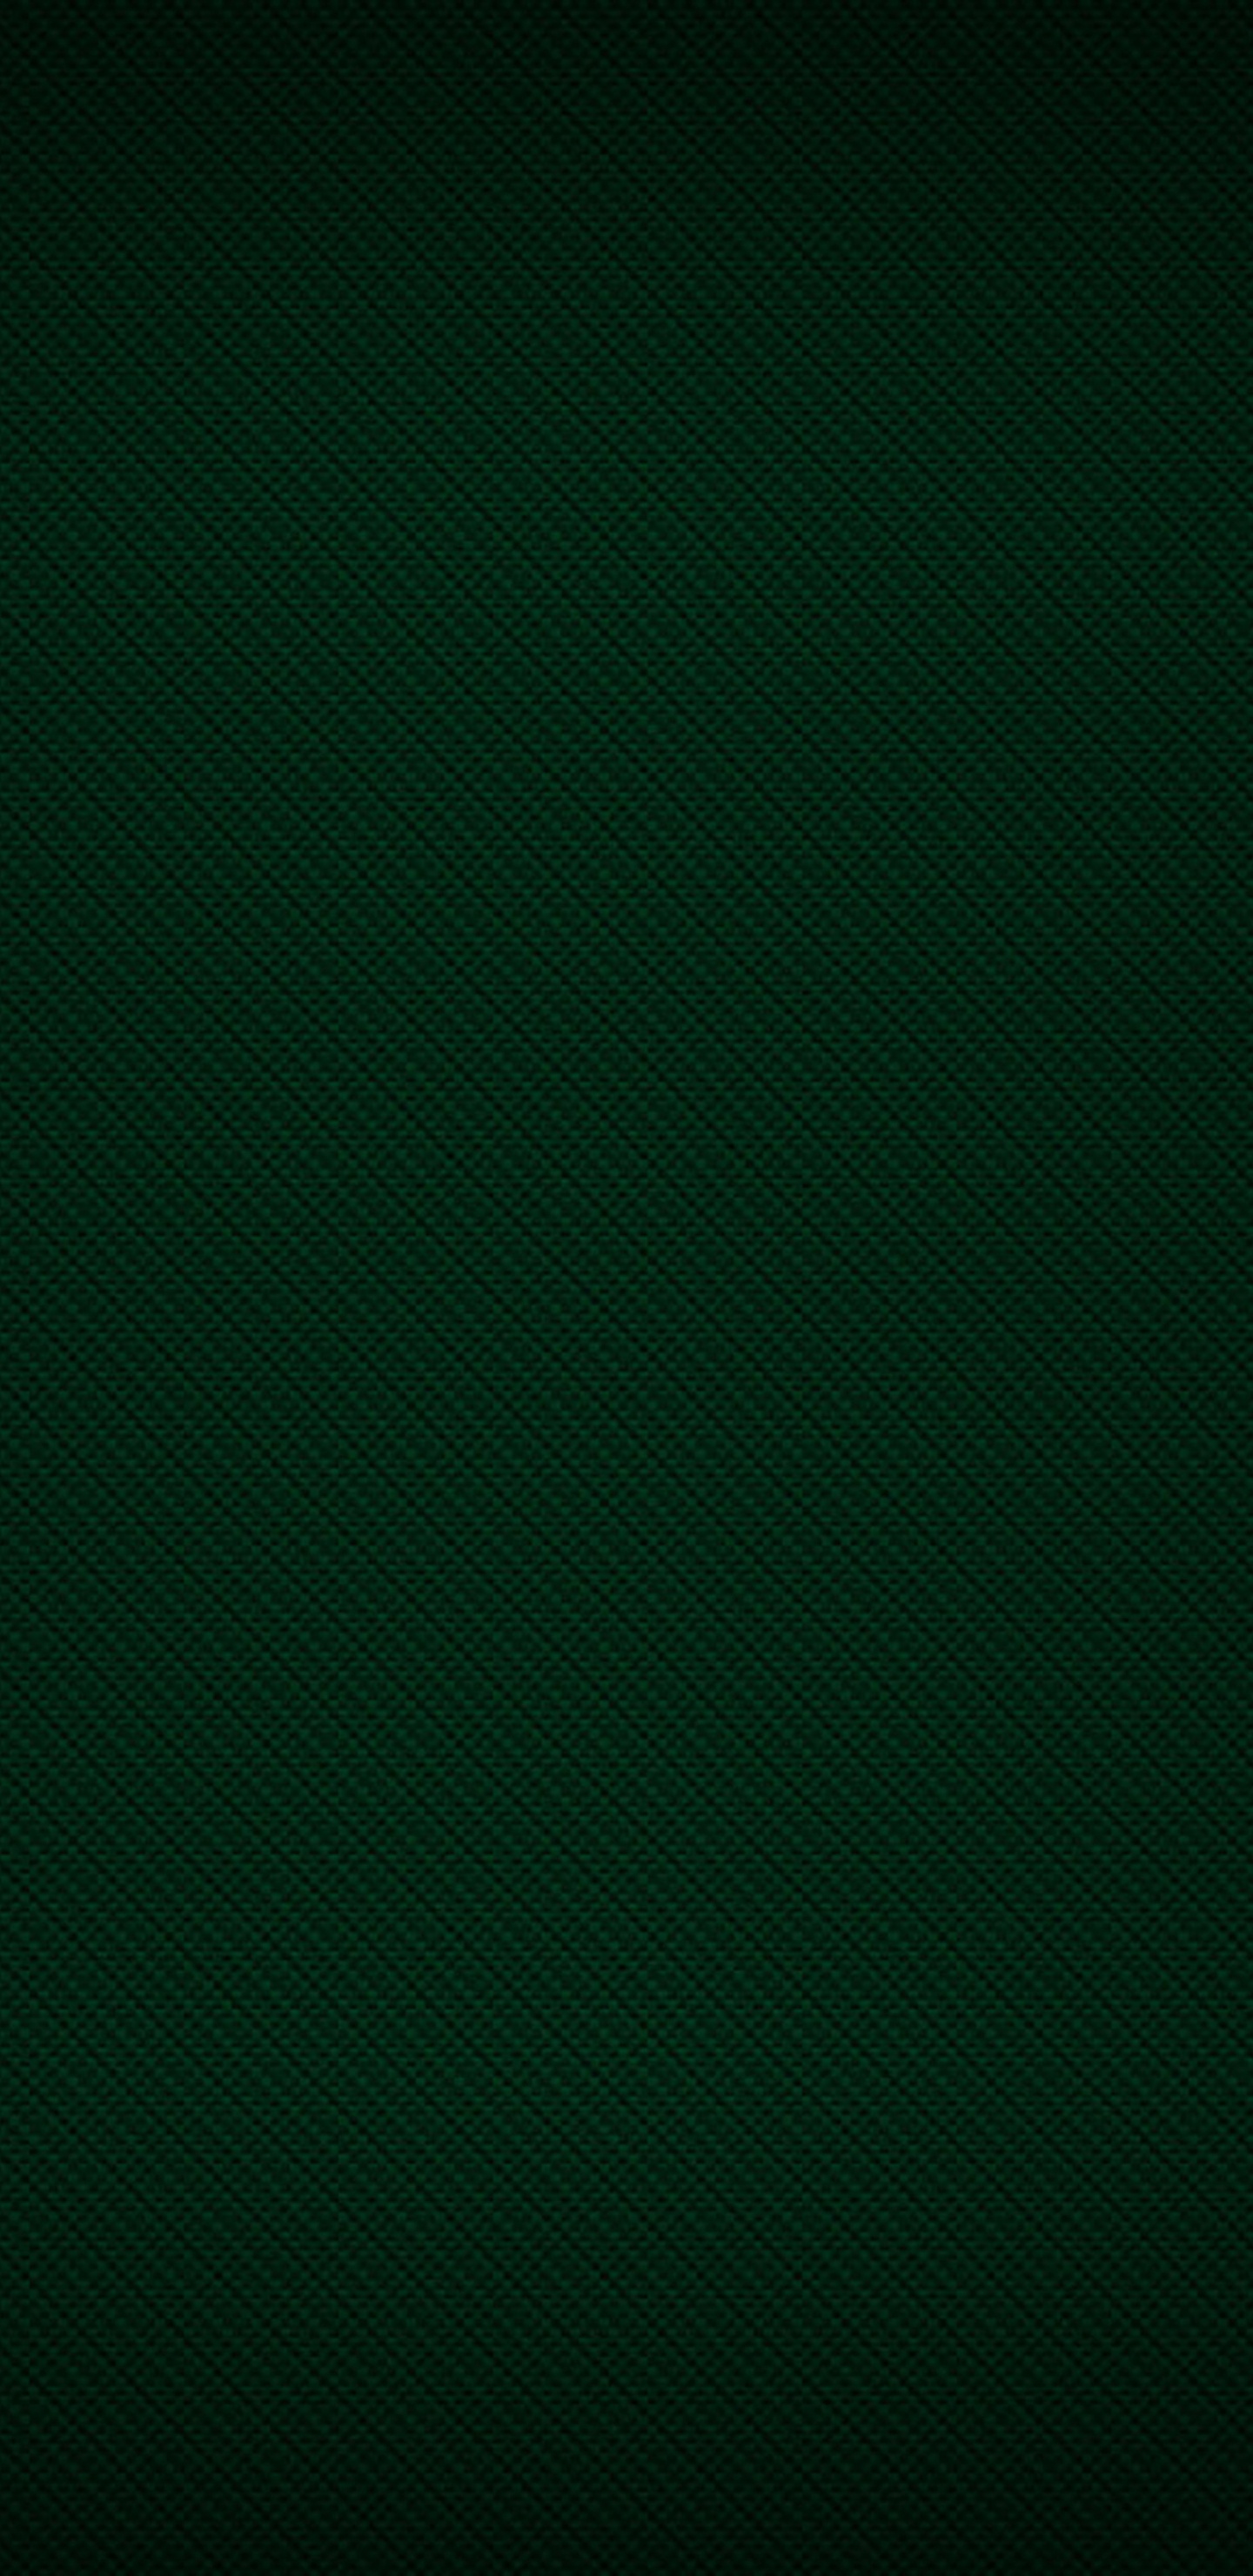 Green Textile in Close up Photography. Wallpaper in 1440x2960 Resolution